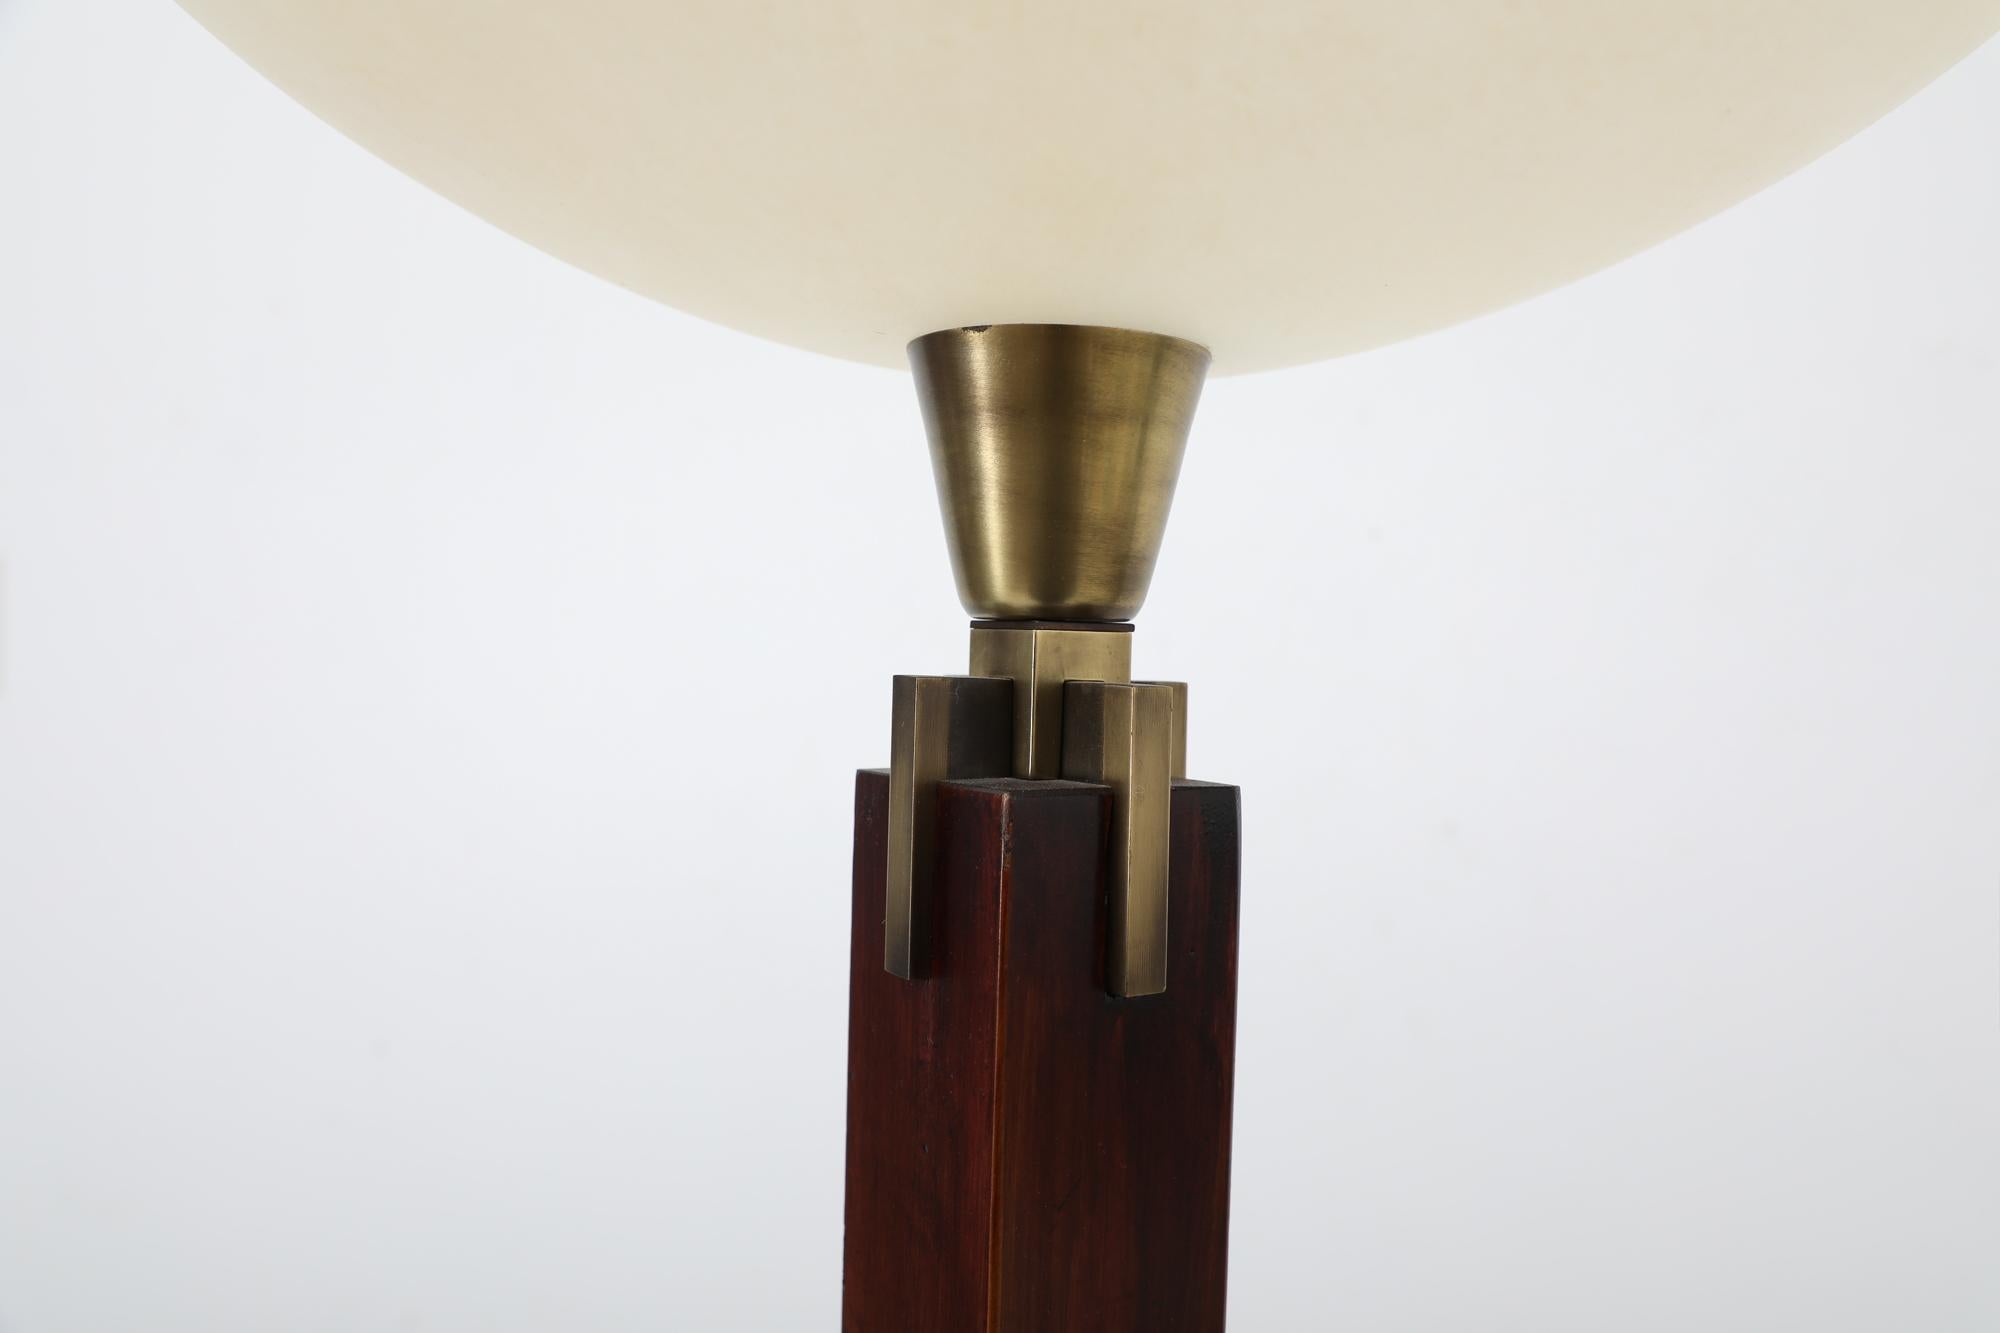 Ghyczy Inspired Art Deco Wood and Brass Torchiere Floor Lamp 1